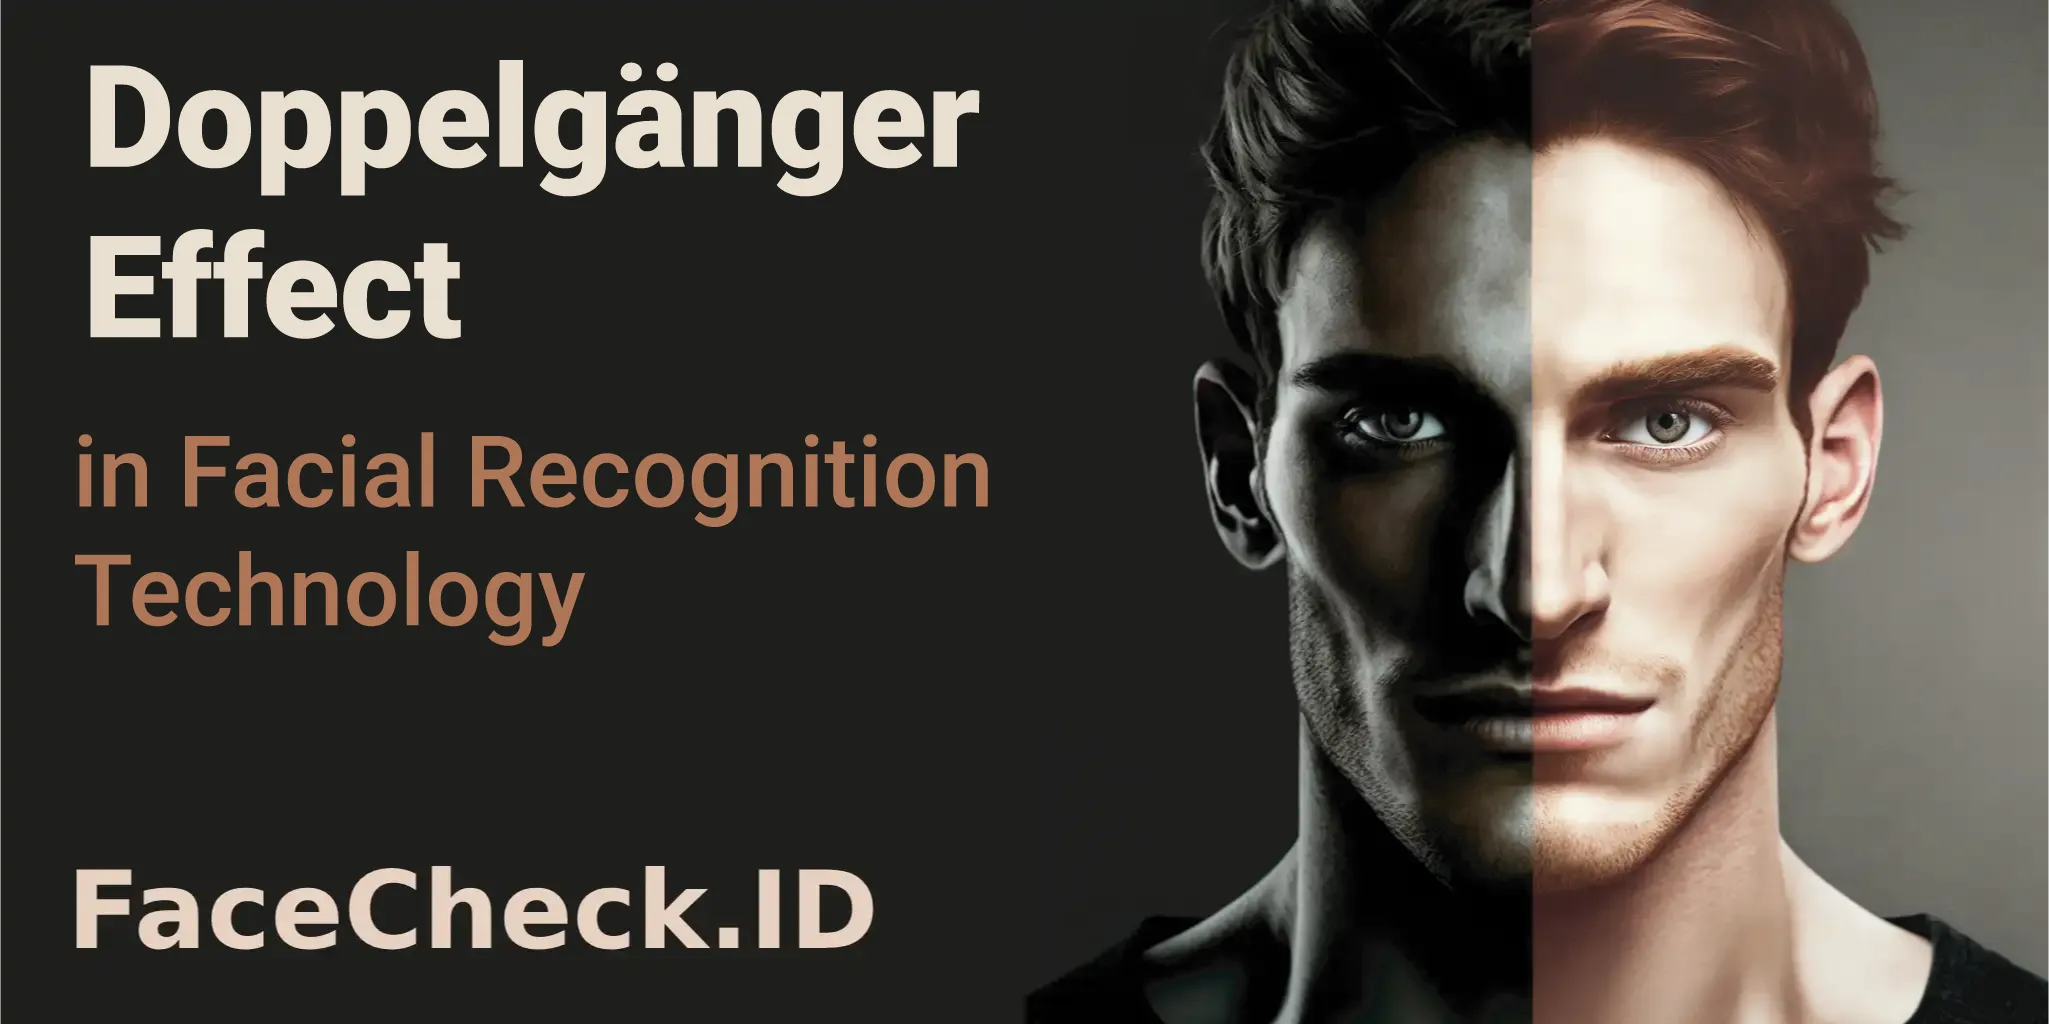 Doppelgänger Effect in Facial Recognition Technology